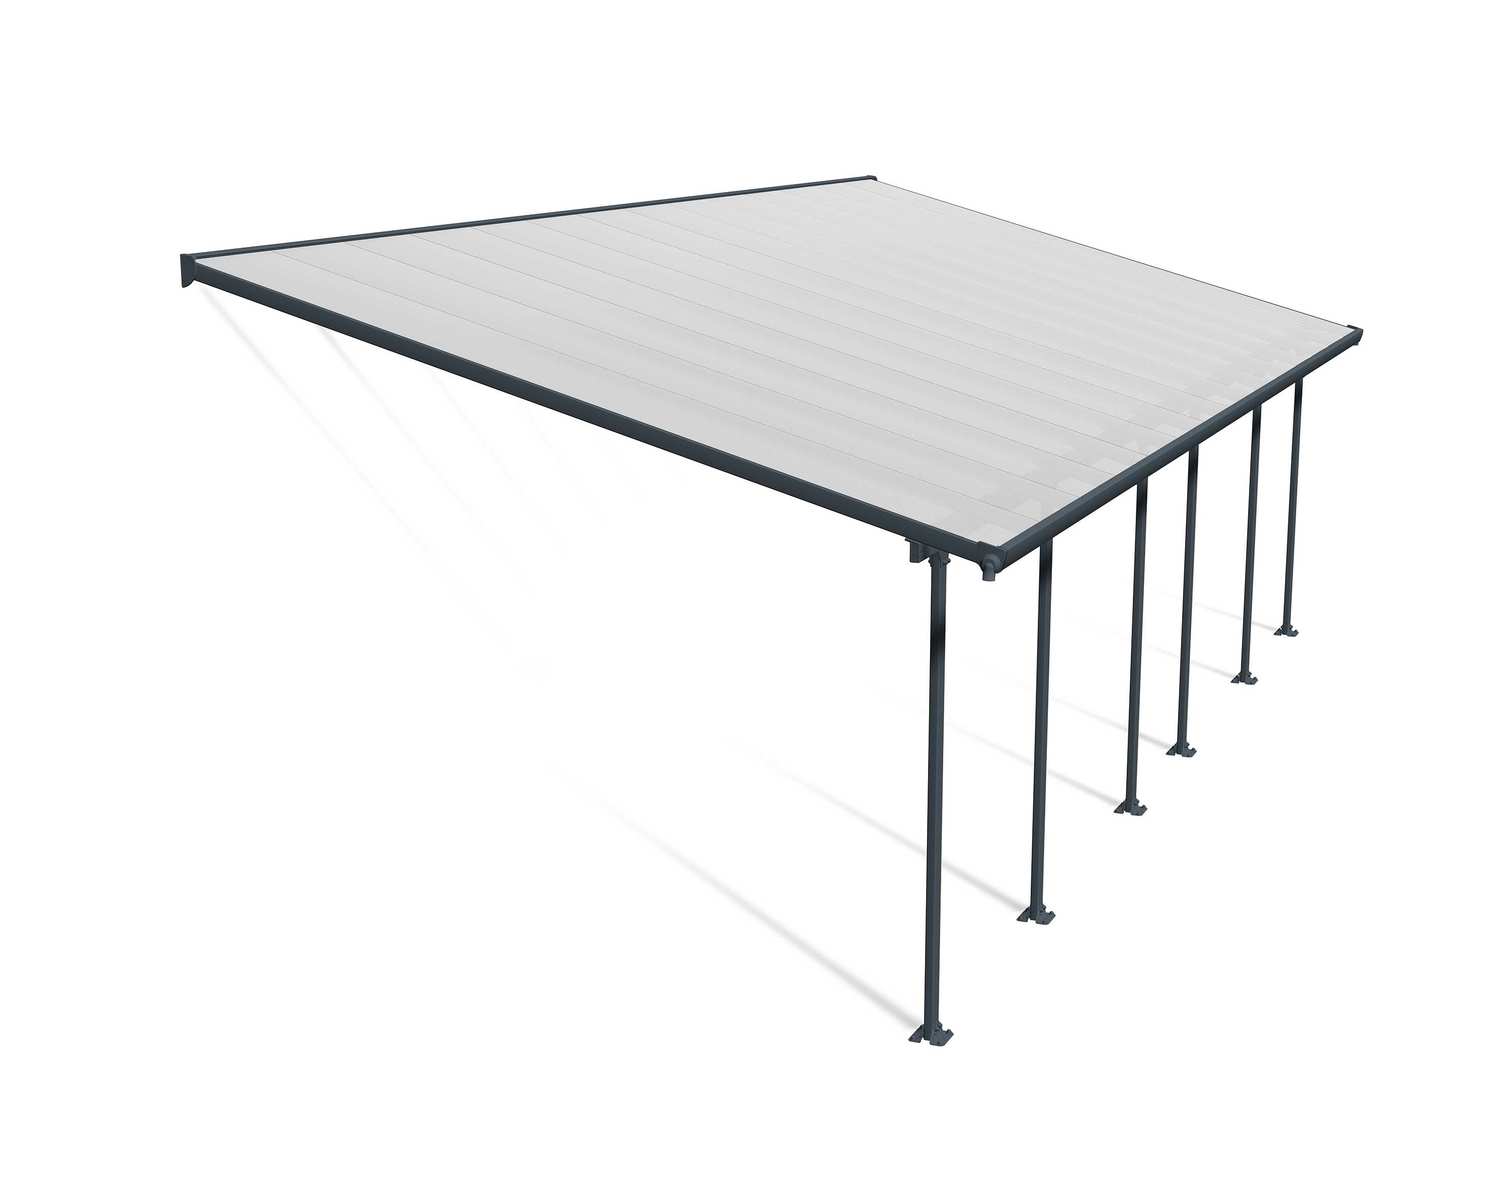 Patio Cover Kit Feria 4 ft. x 8.50 ft. Grey Structure & Clear Multi Wall Glazing